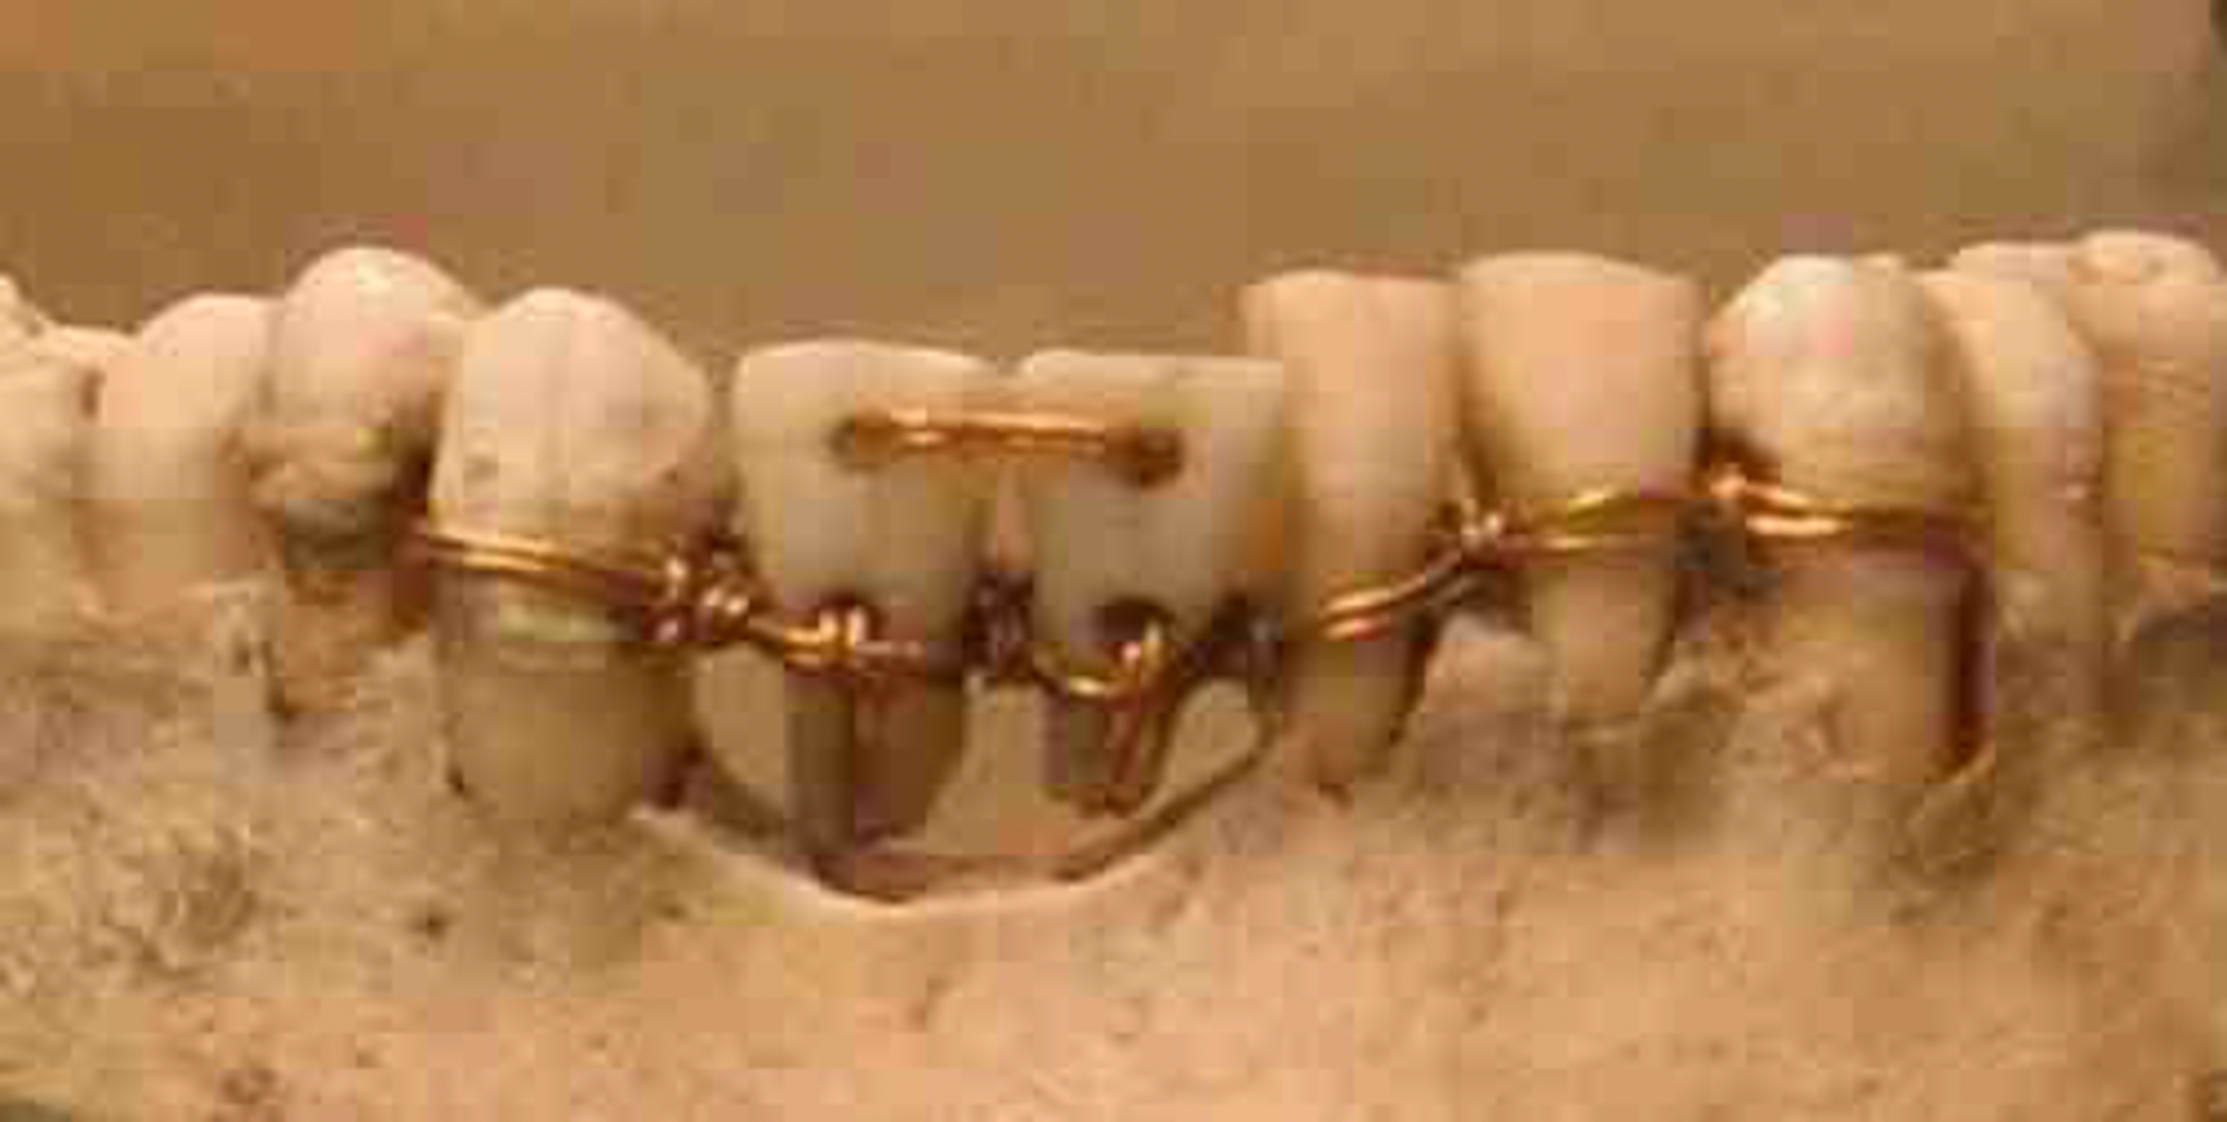 A row of bottom teeth with copper-looking wires on them